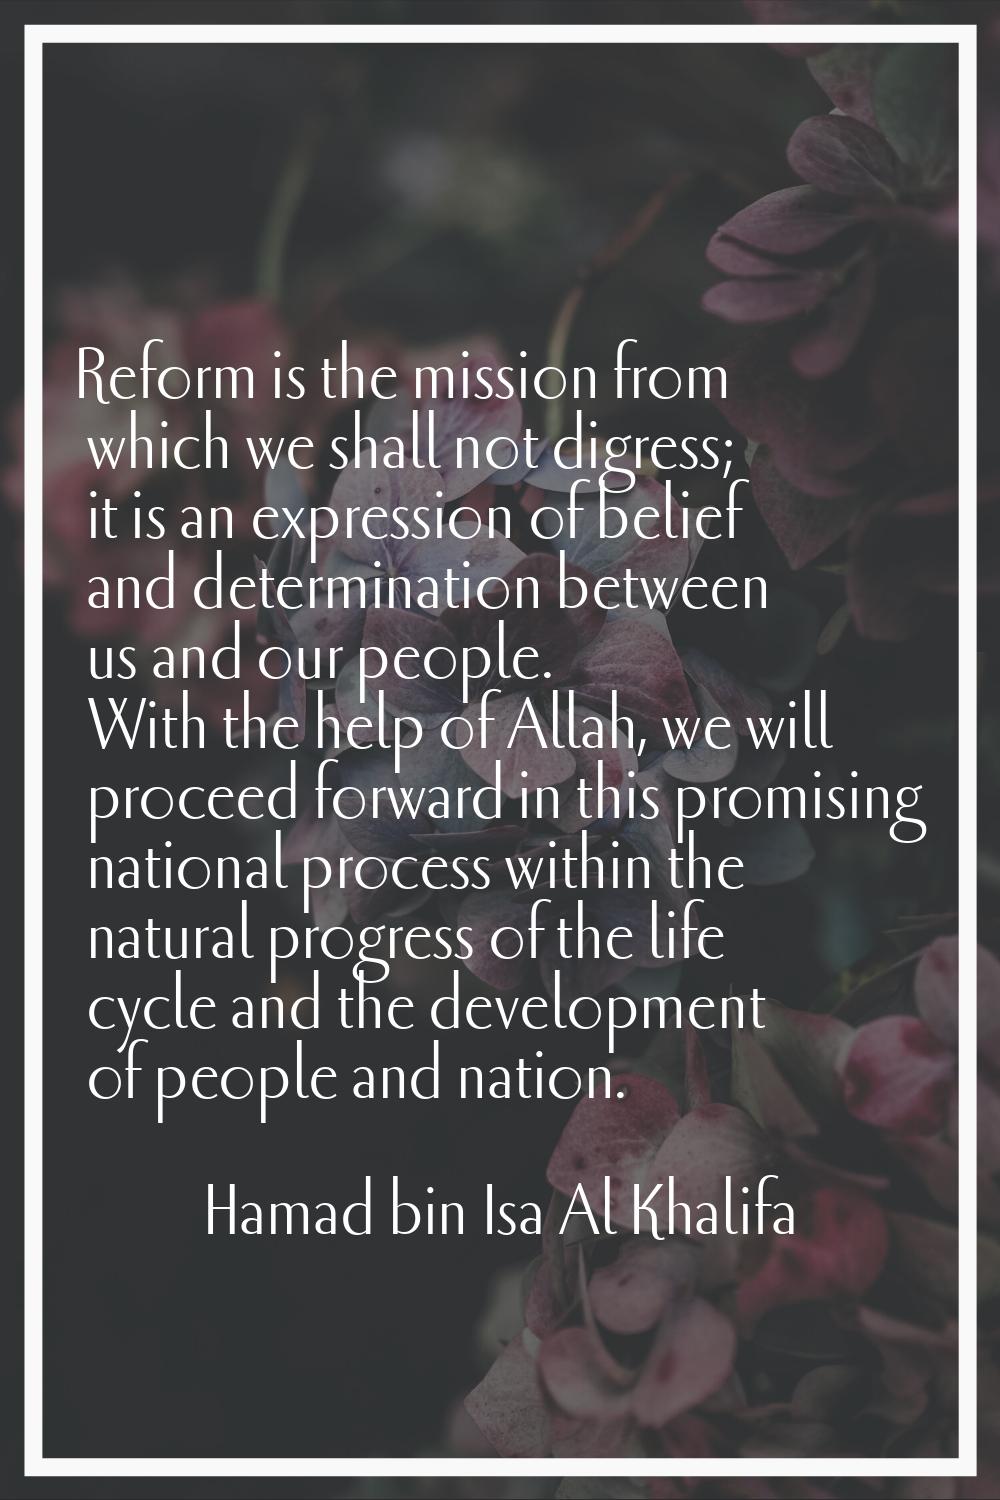 Reform is the mission from which we shall not digress; it is an expression of belief and determinat